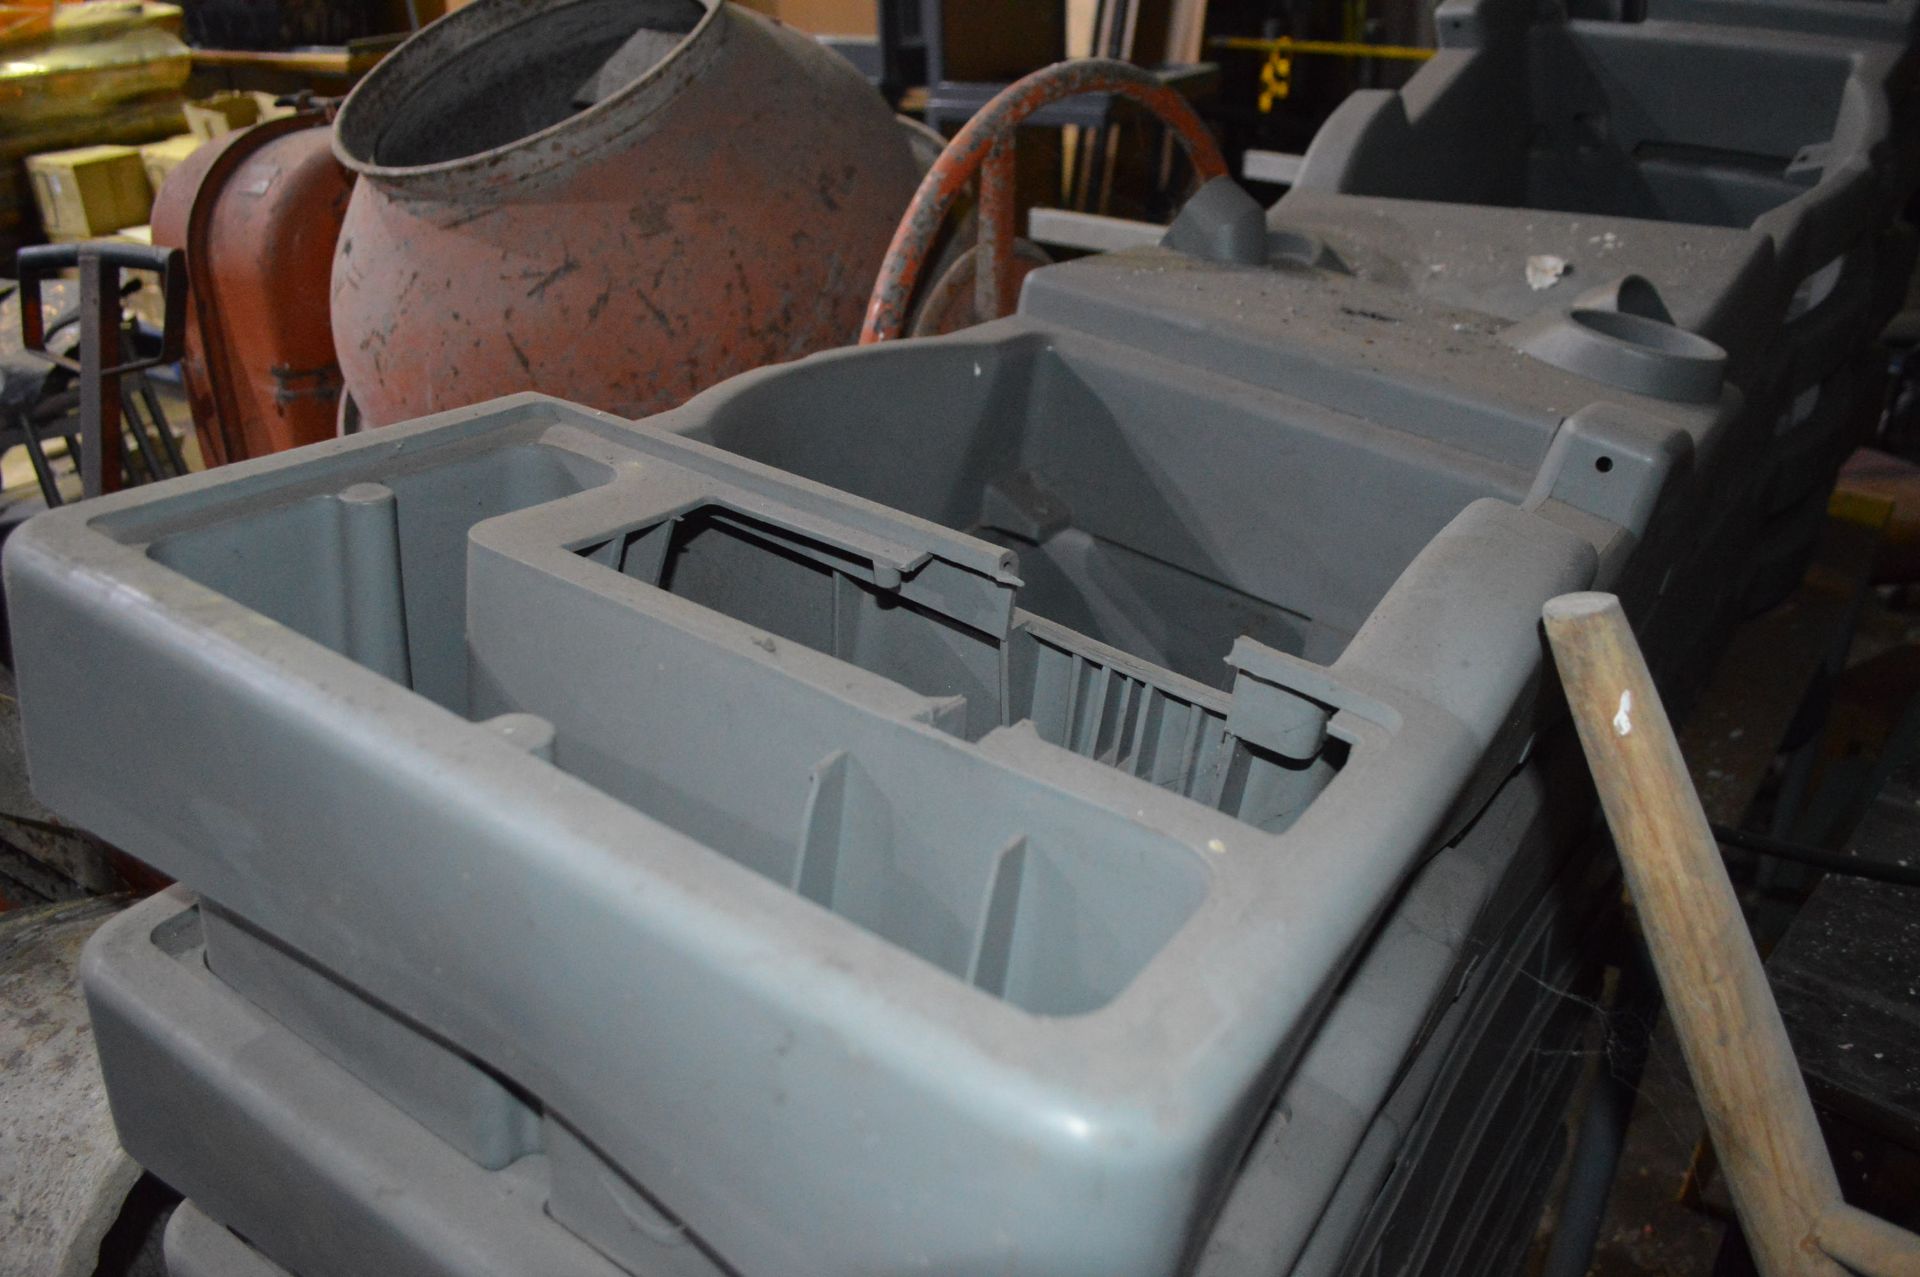 HUGE LOT OF SPARES FOR PORTABLE TOILETS, SIMILAR TO PORTALOO *NO VAT*   COLLECTION / VIEWING FROM